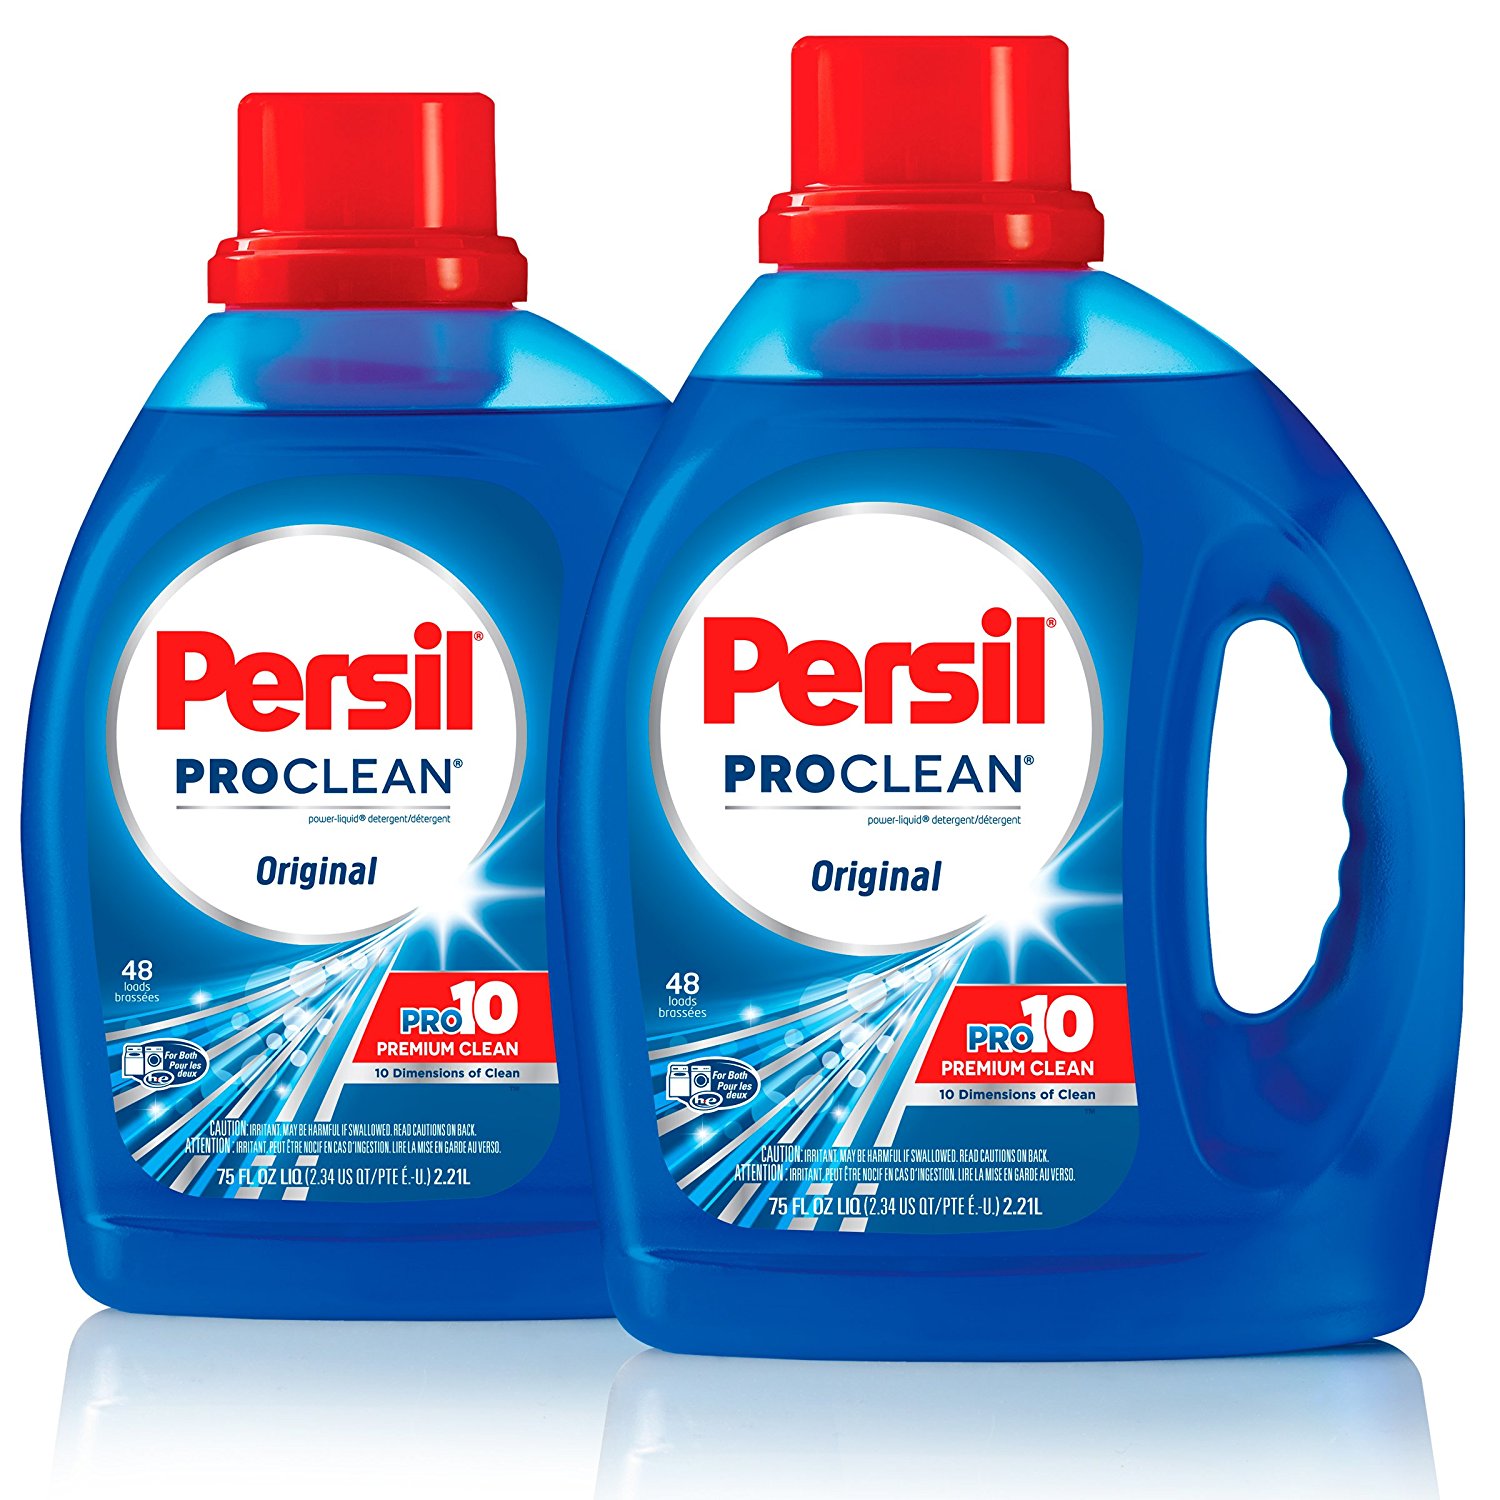 2-pack Persil liquid laundry detergent (96 loads) for $15